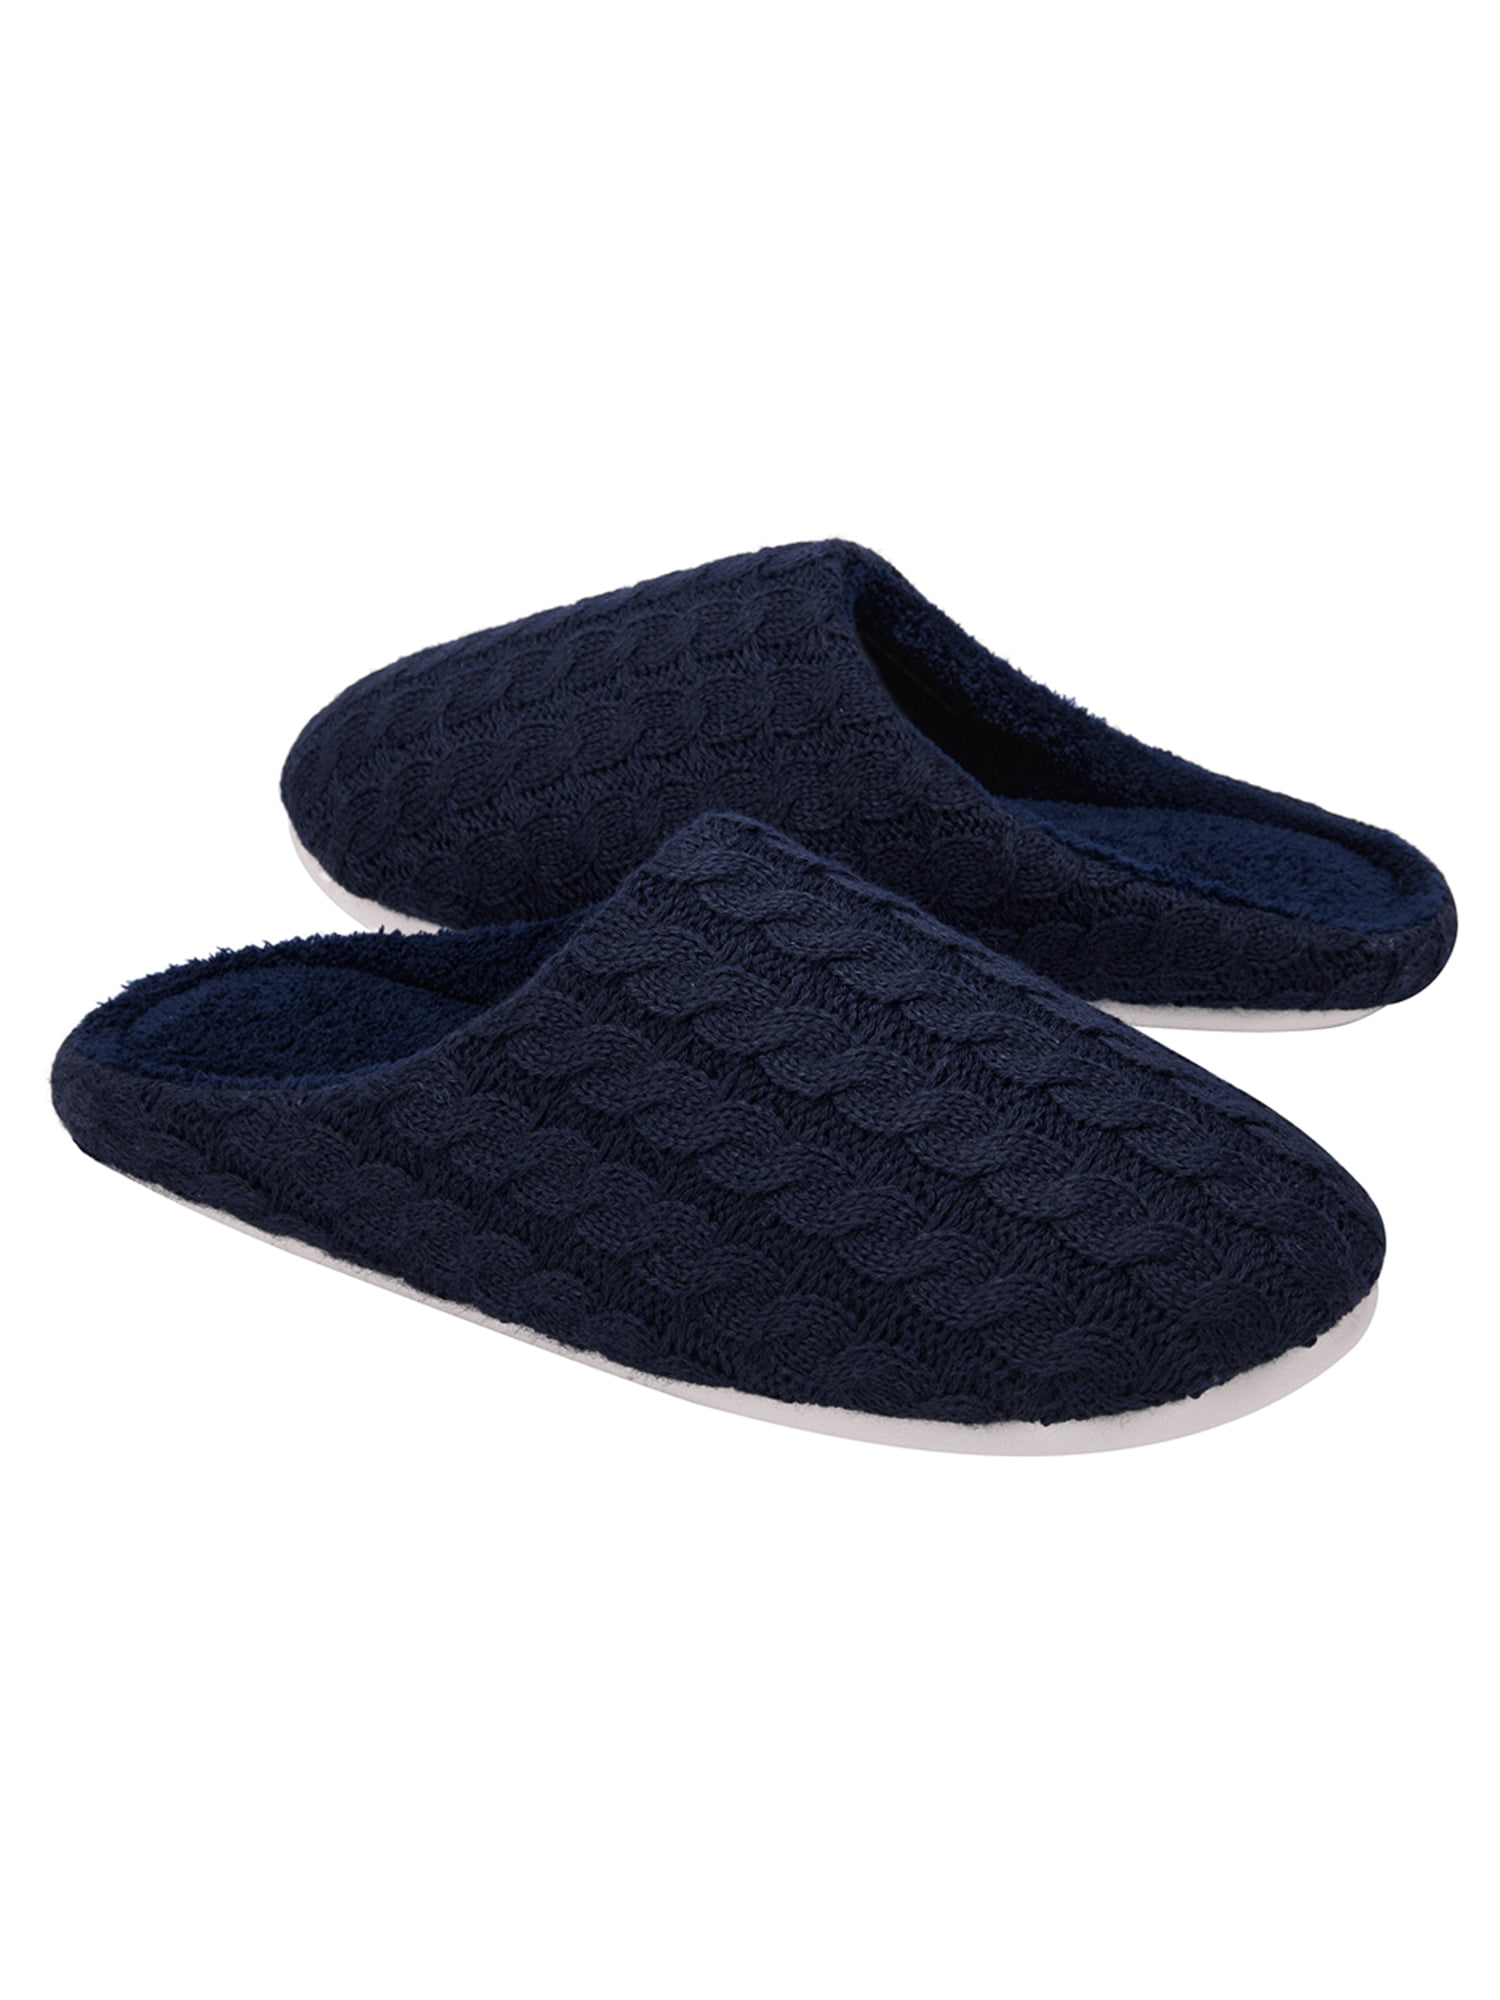 Raku Women/Mens Cotton Knit Memory Foam Slippers Terry Cloth Anti Skid Indoor/Outdoor Slip-on House Shoes